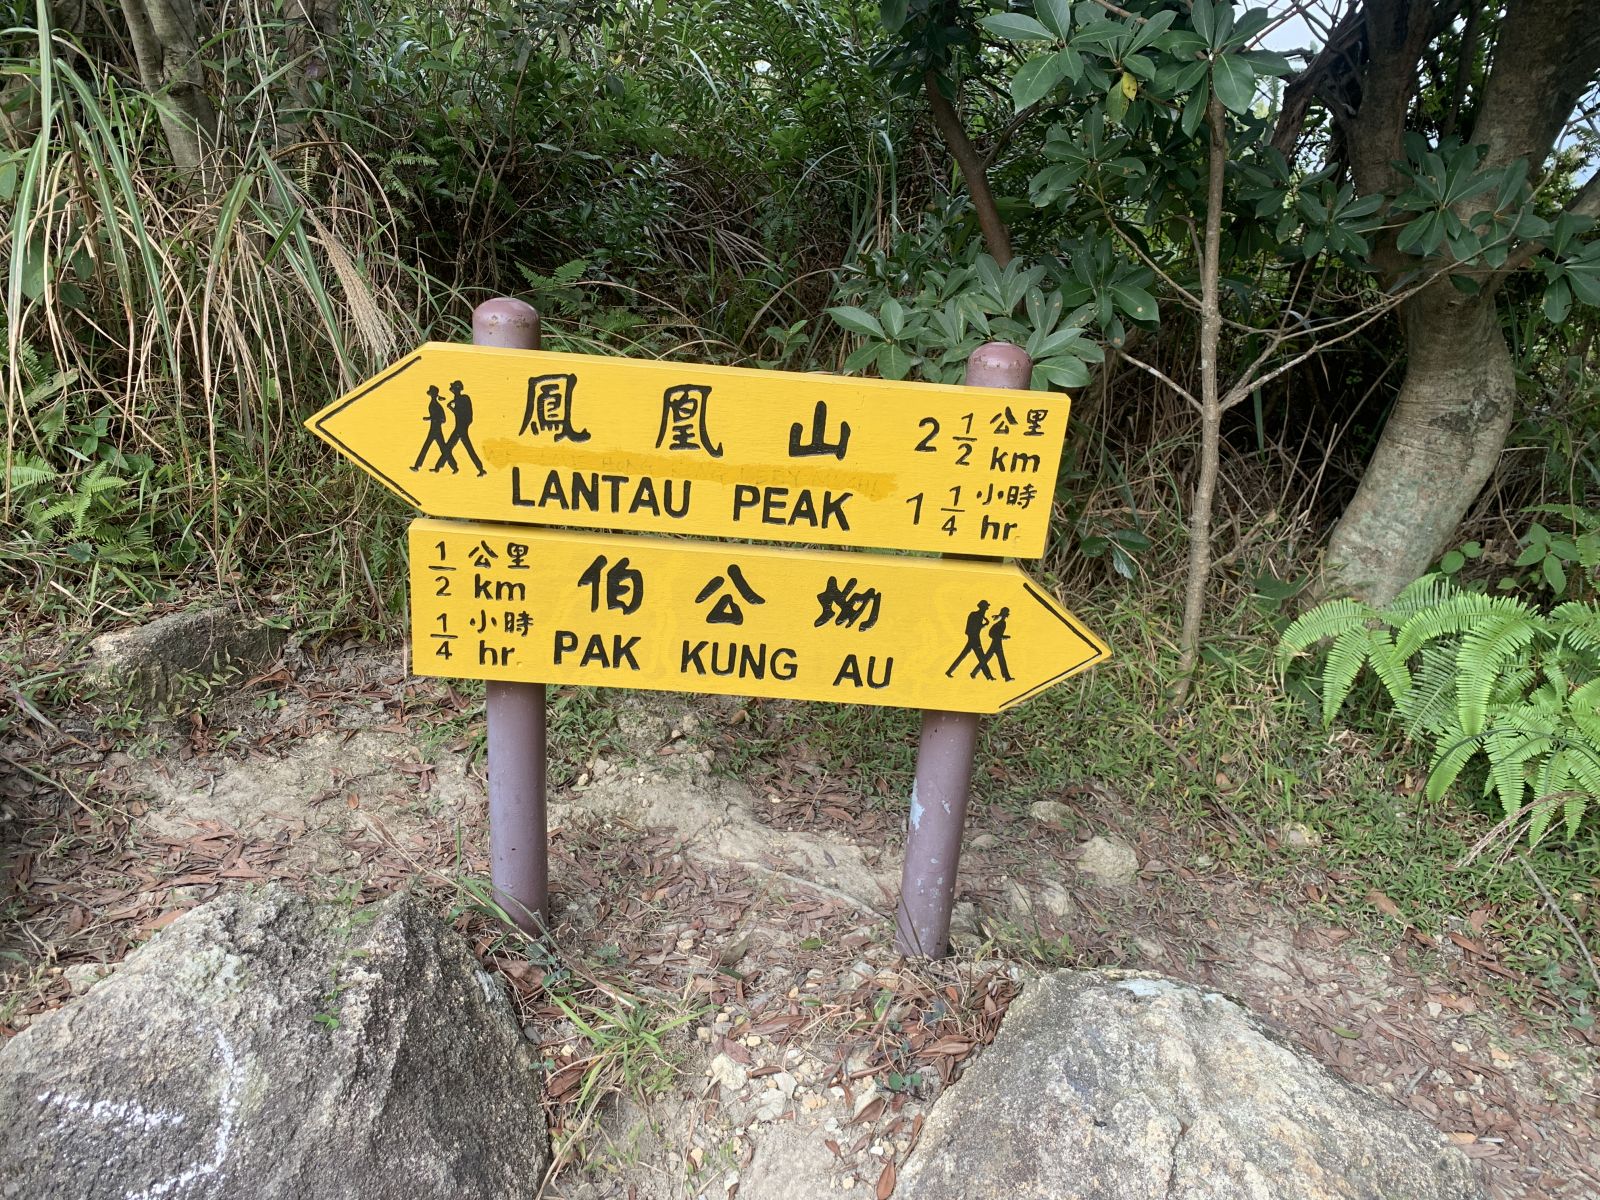 Find this sign and walk along the Lantau trail